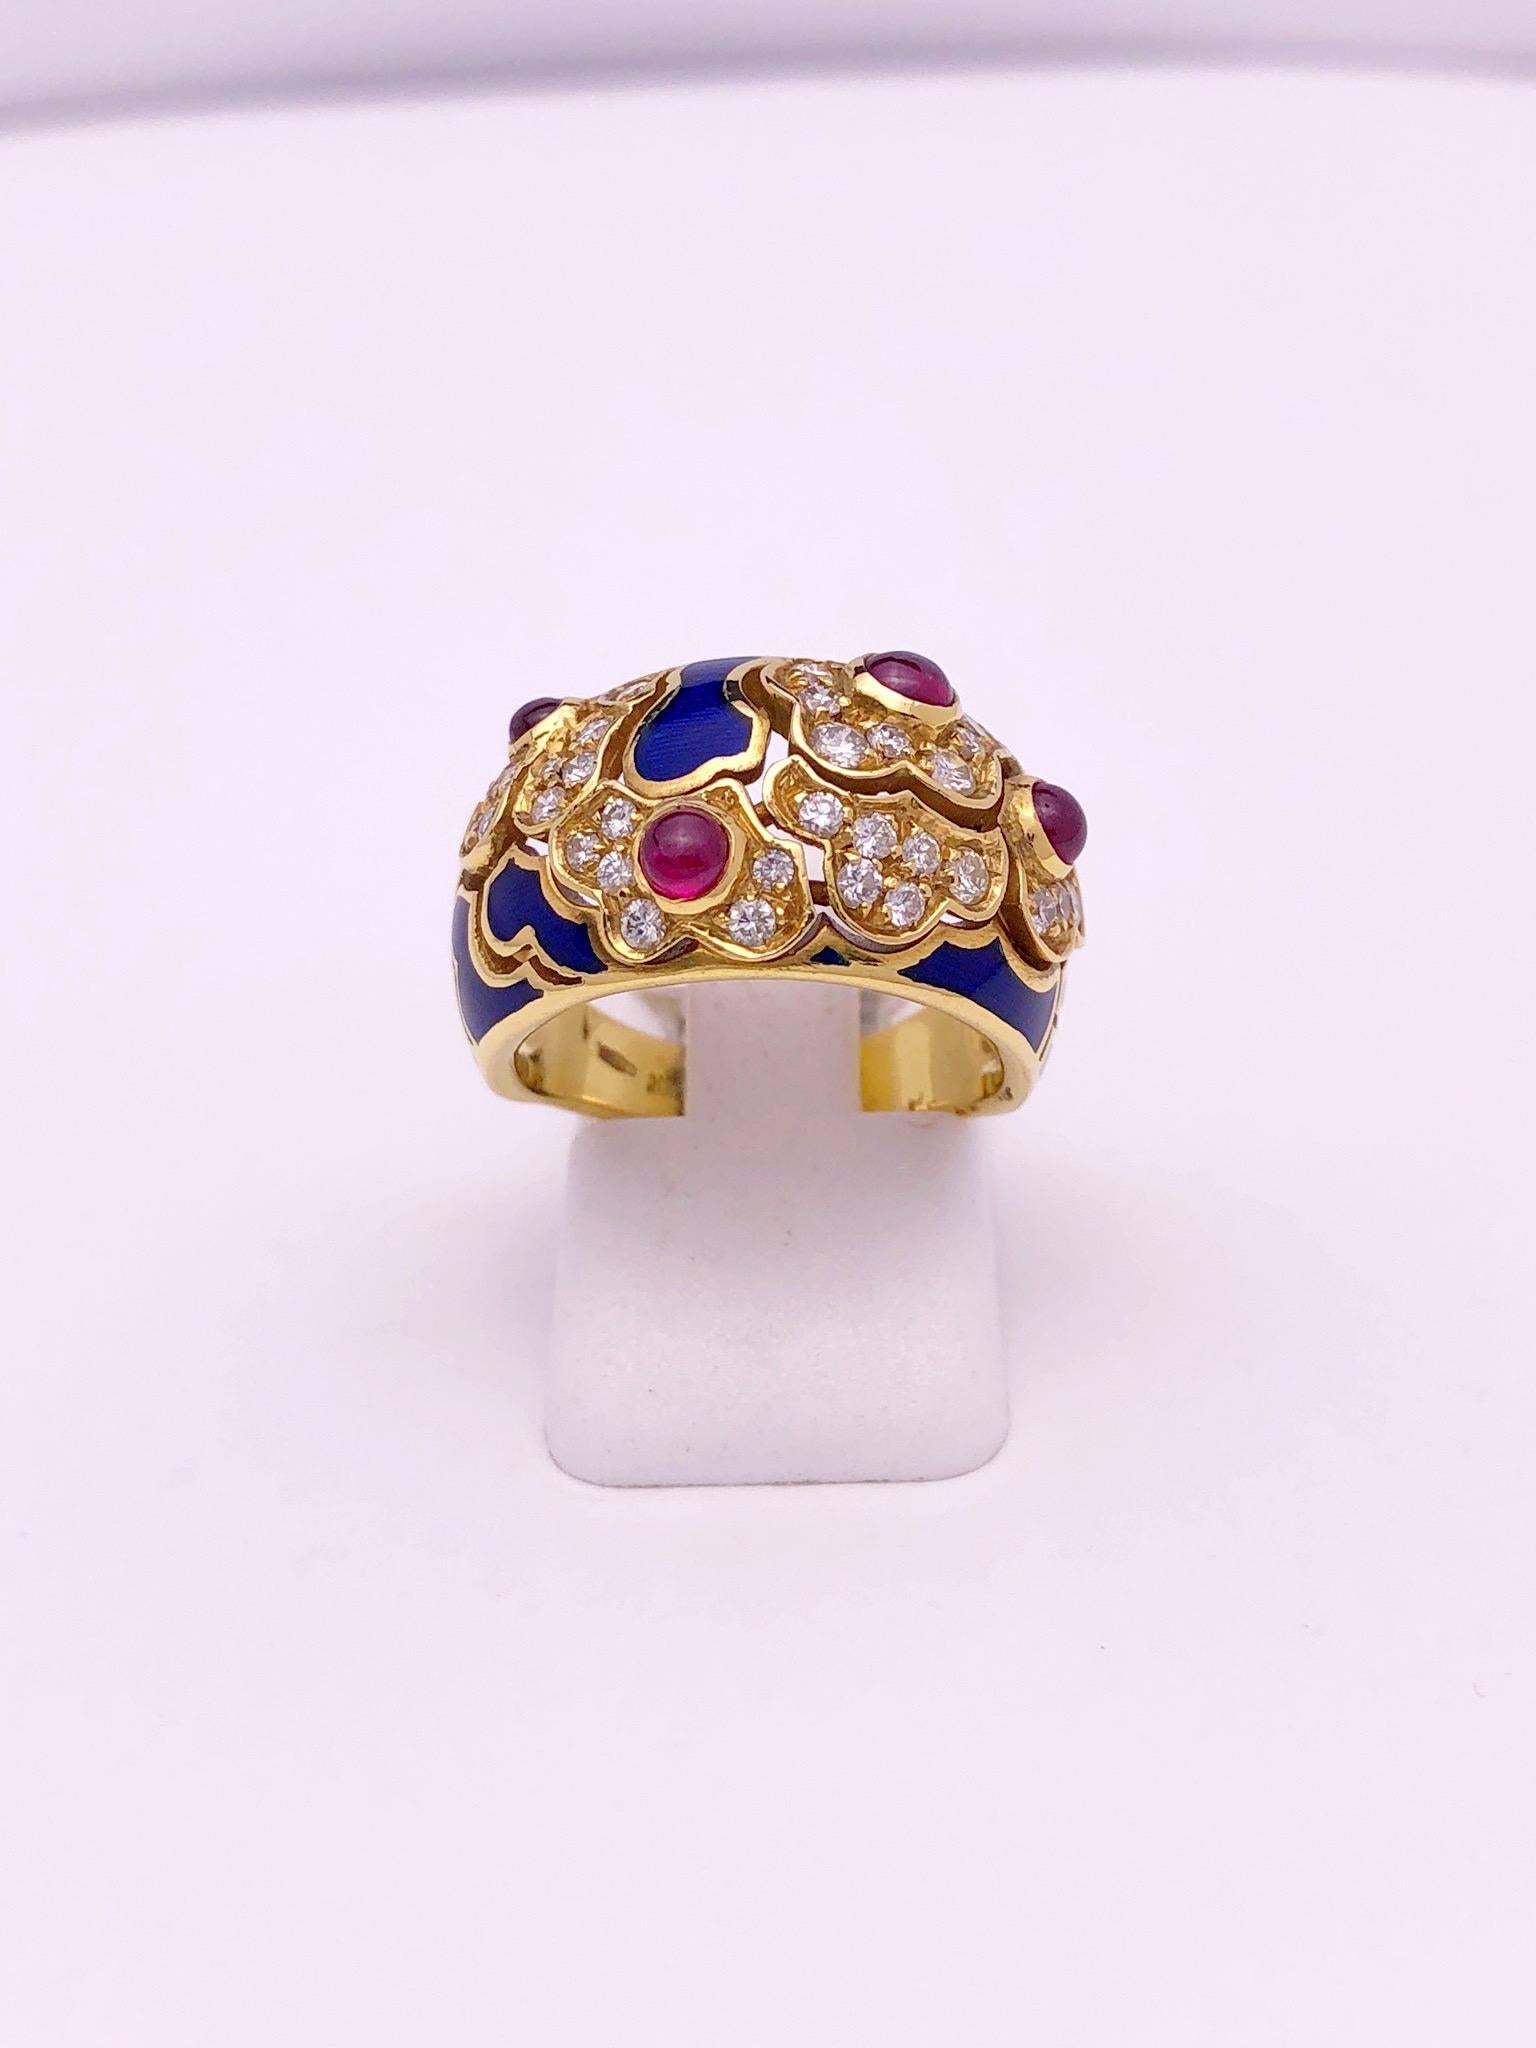 This lovely ring features a pattern of organic shaped flowers set with round brilliant diamonds. Each of the 4 flowers are set with a cabachone ruby. Blue enamel organic shapes finish off the ring which is entirely set in 18 karat yellow